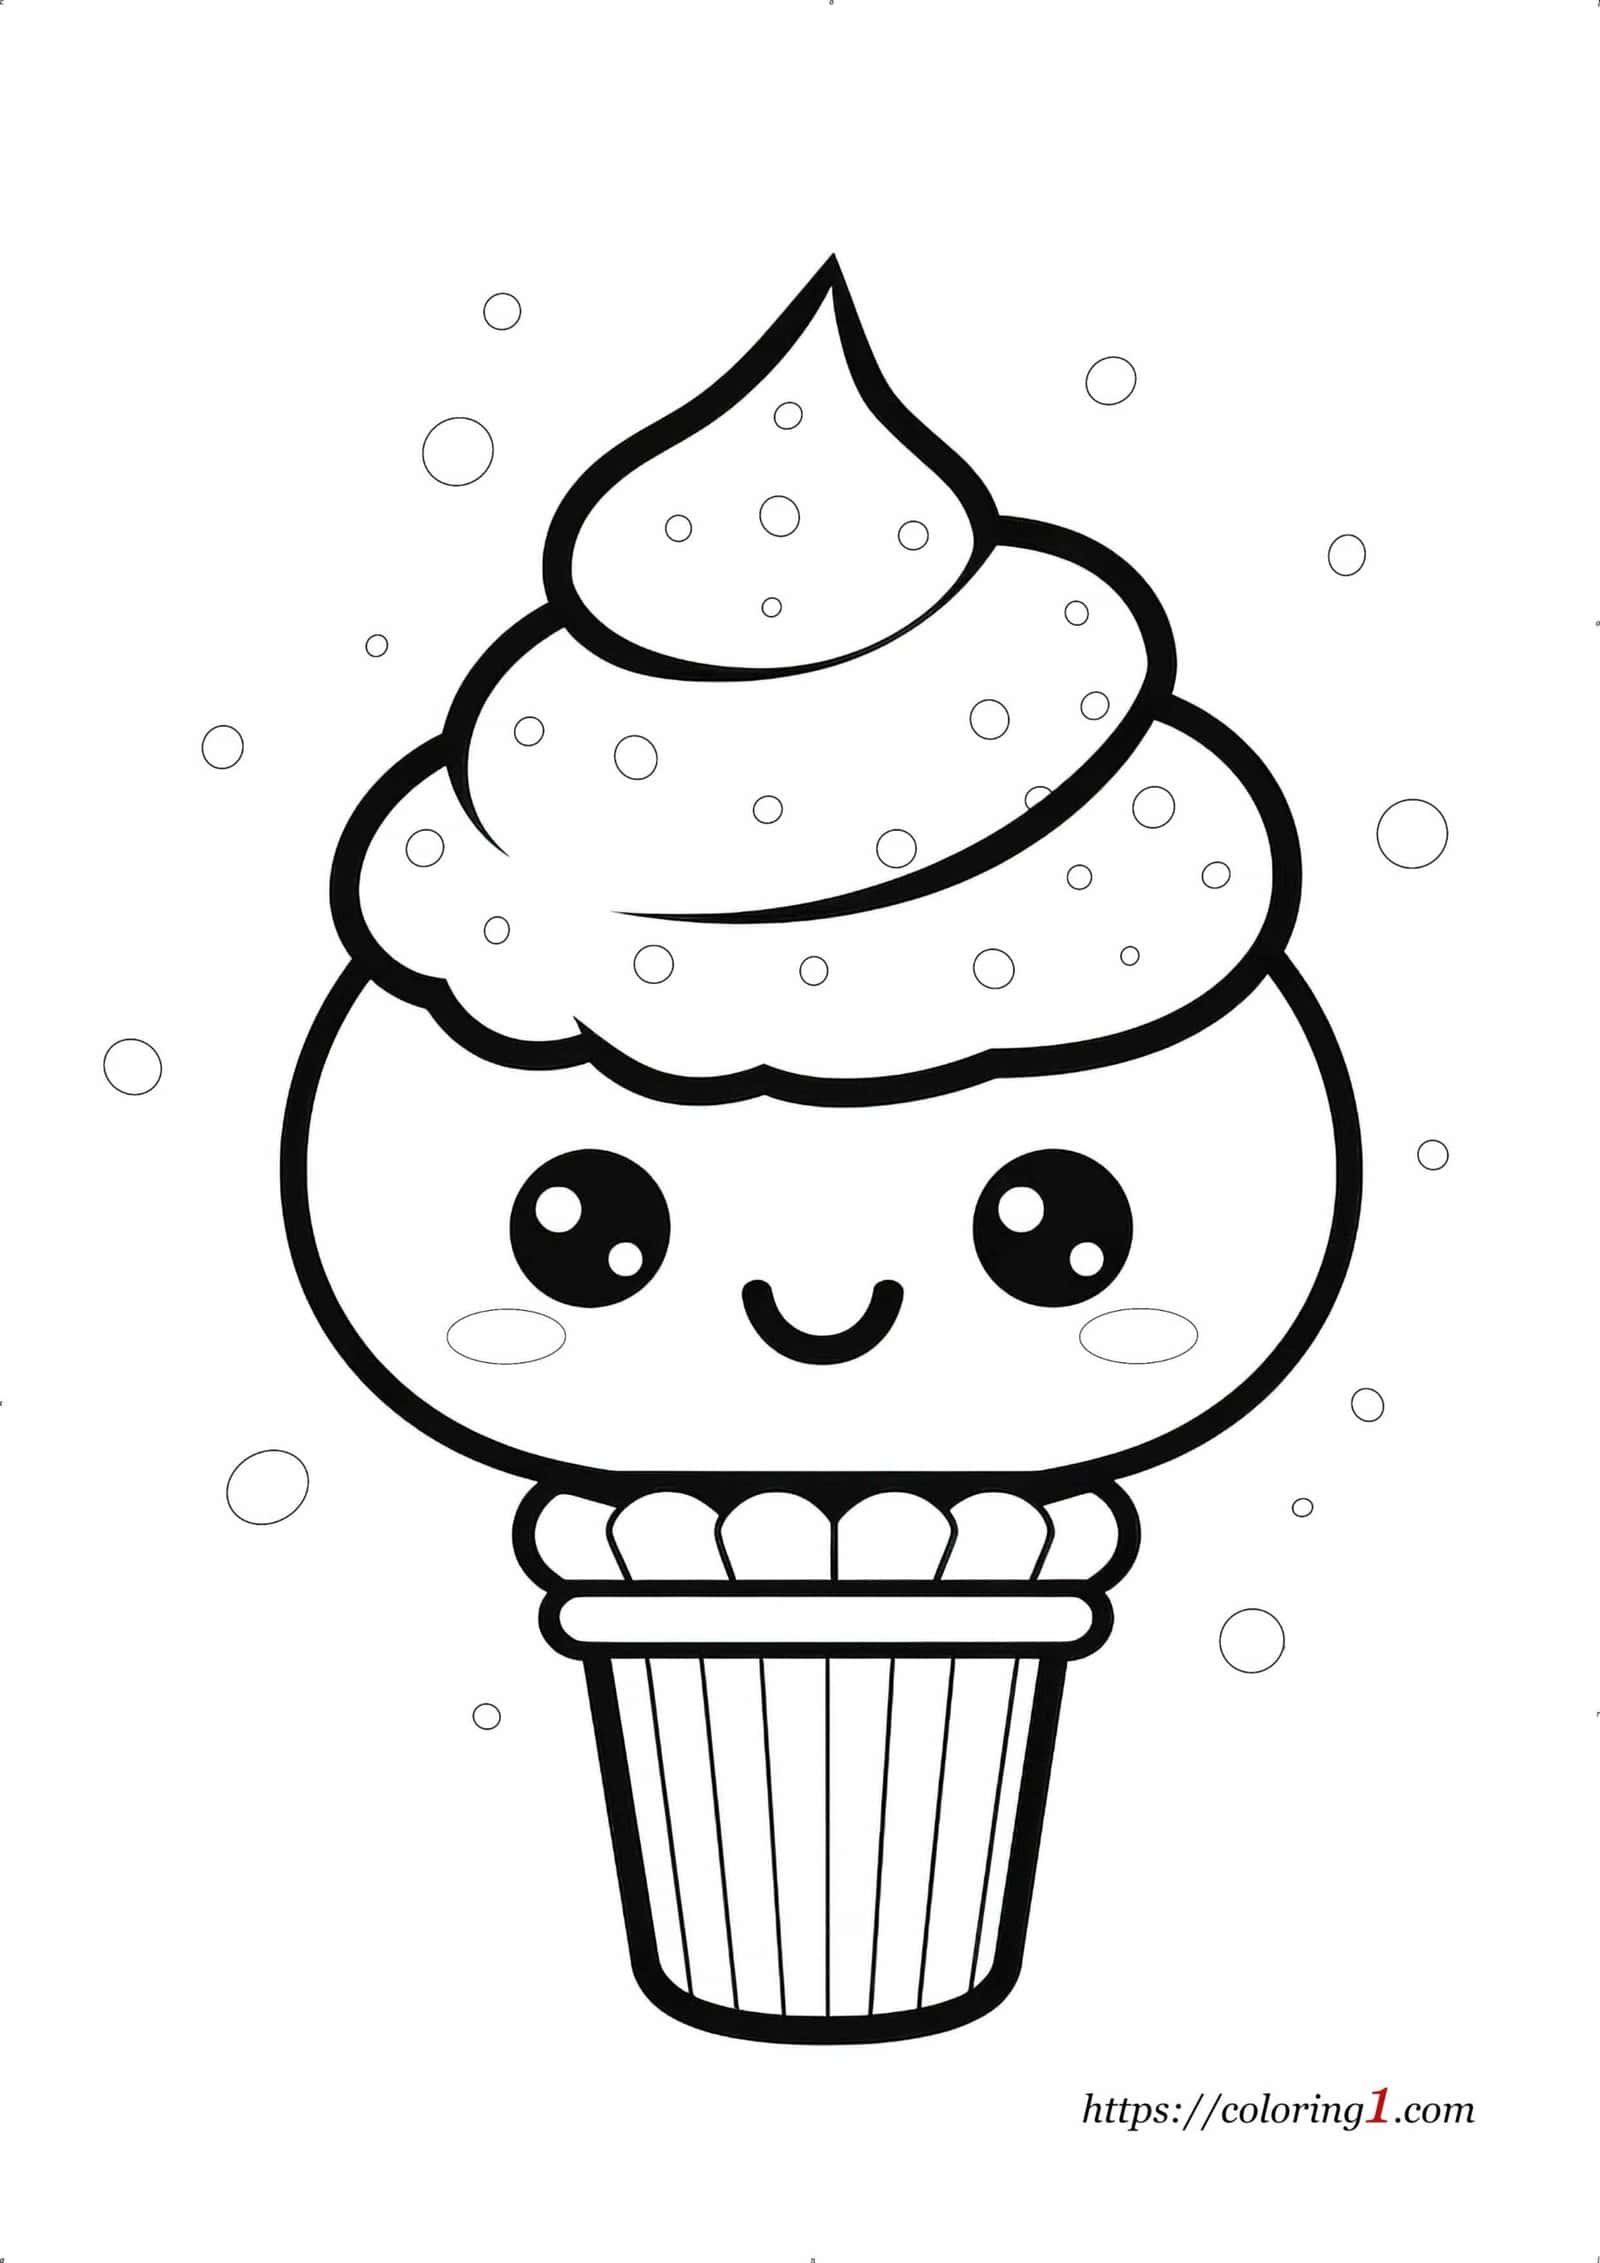 Kawaii Ice Cream coloring page for kids